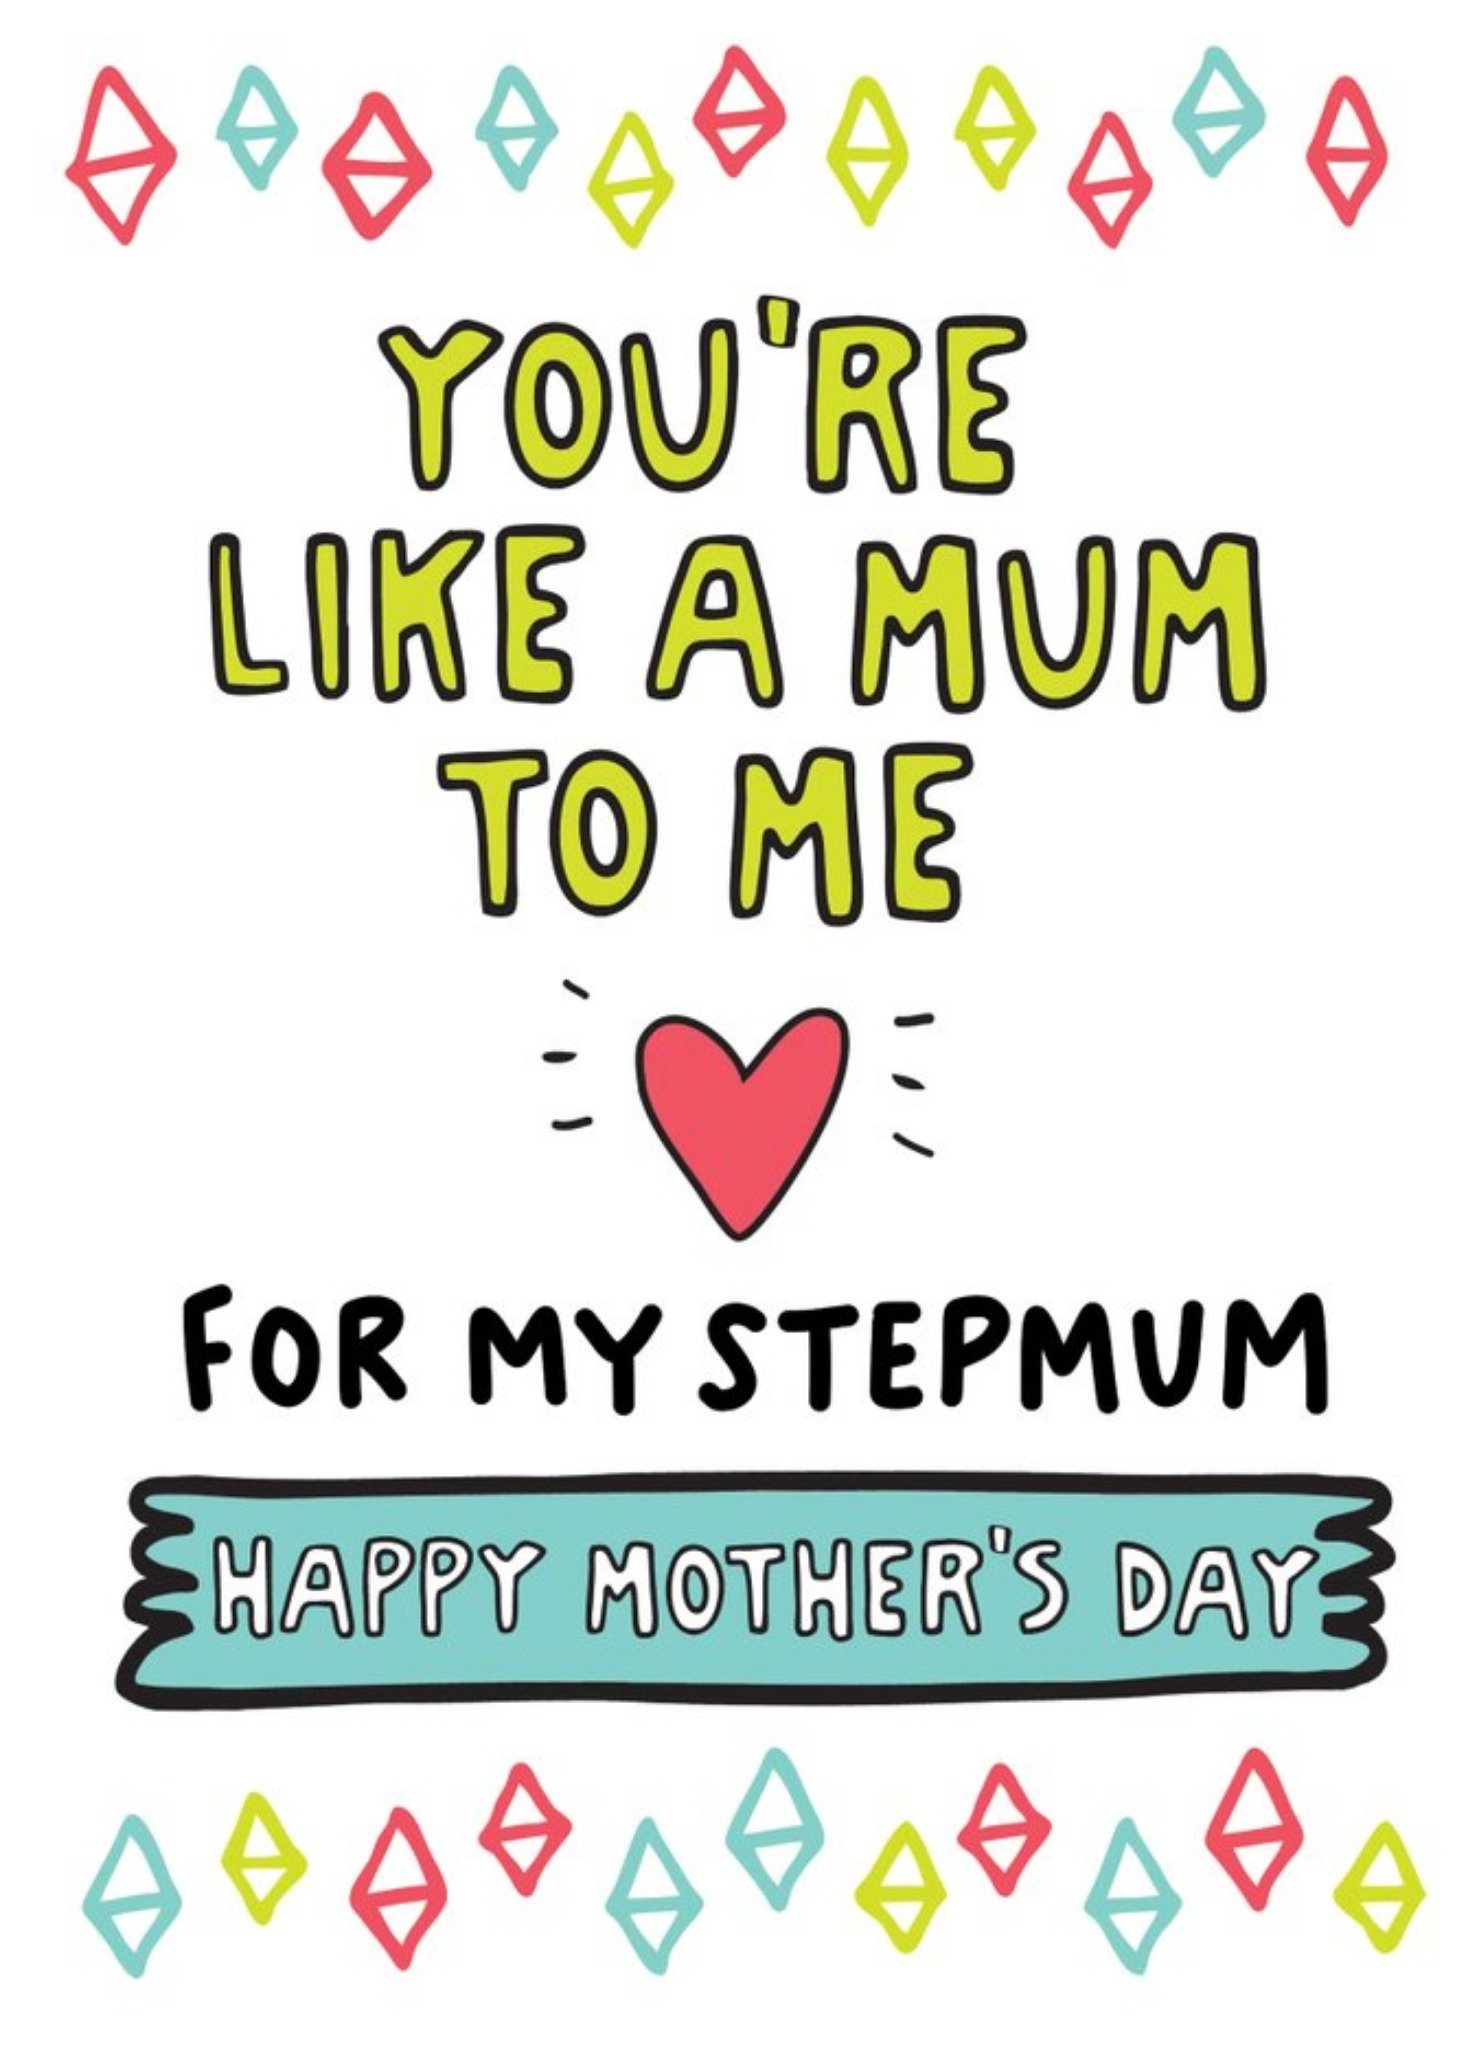 Moonpig Angela Chick You're Like A Mum To Me Stepmum Mother's Day Card Ecard